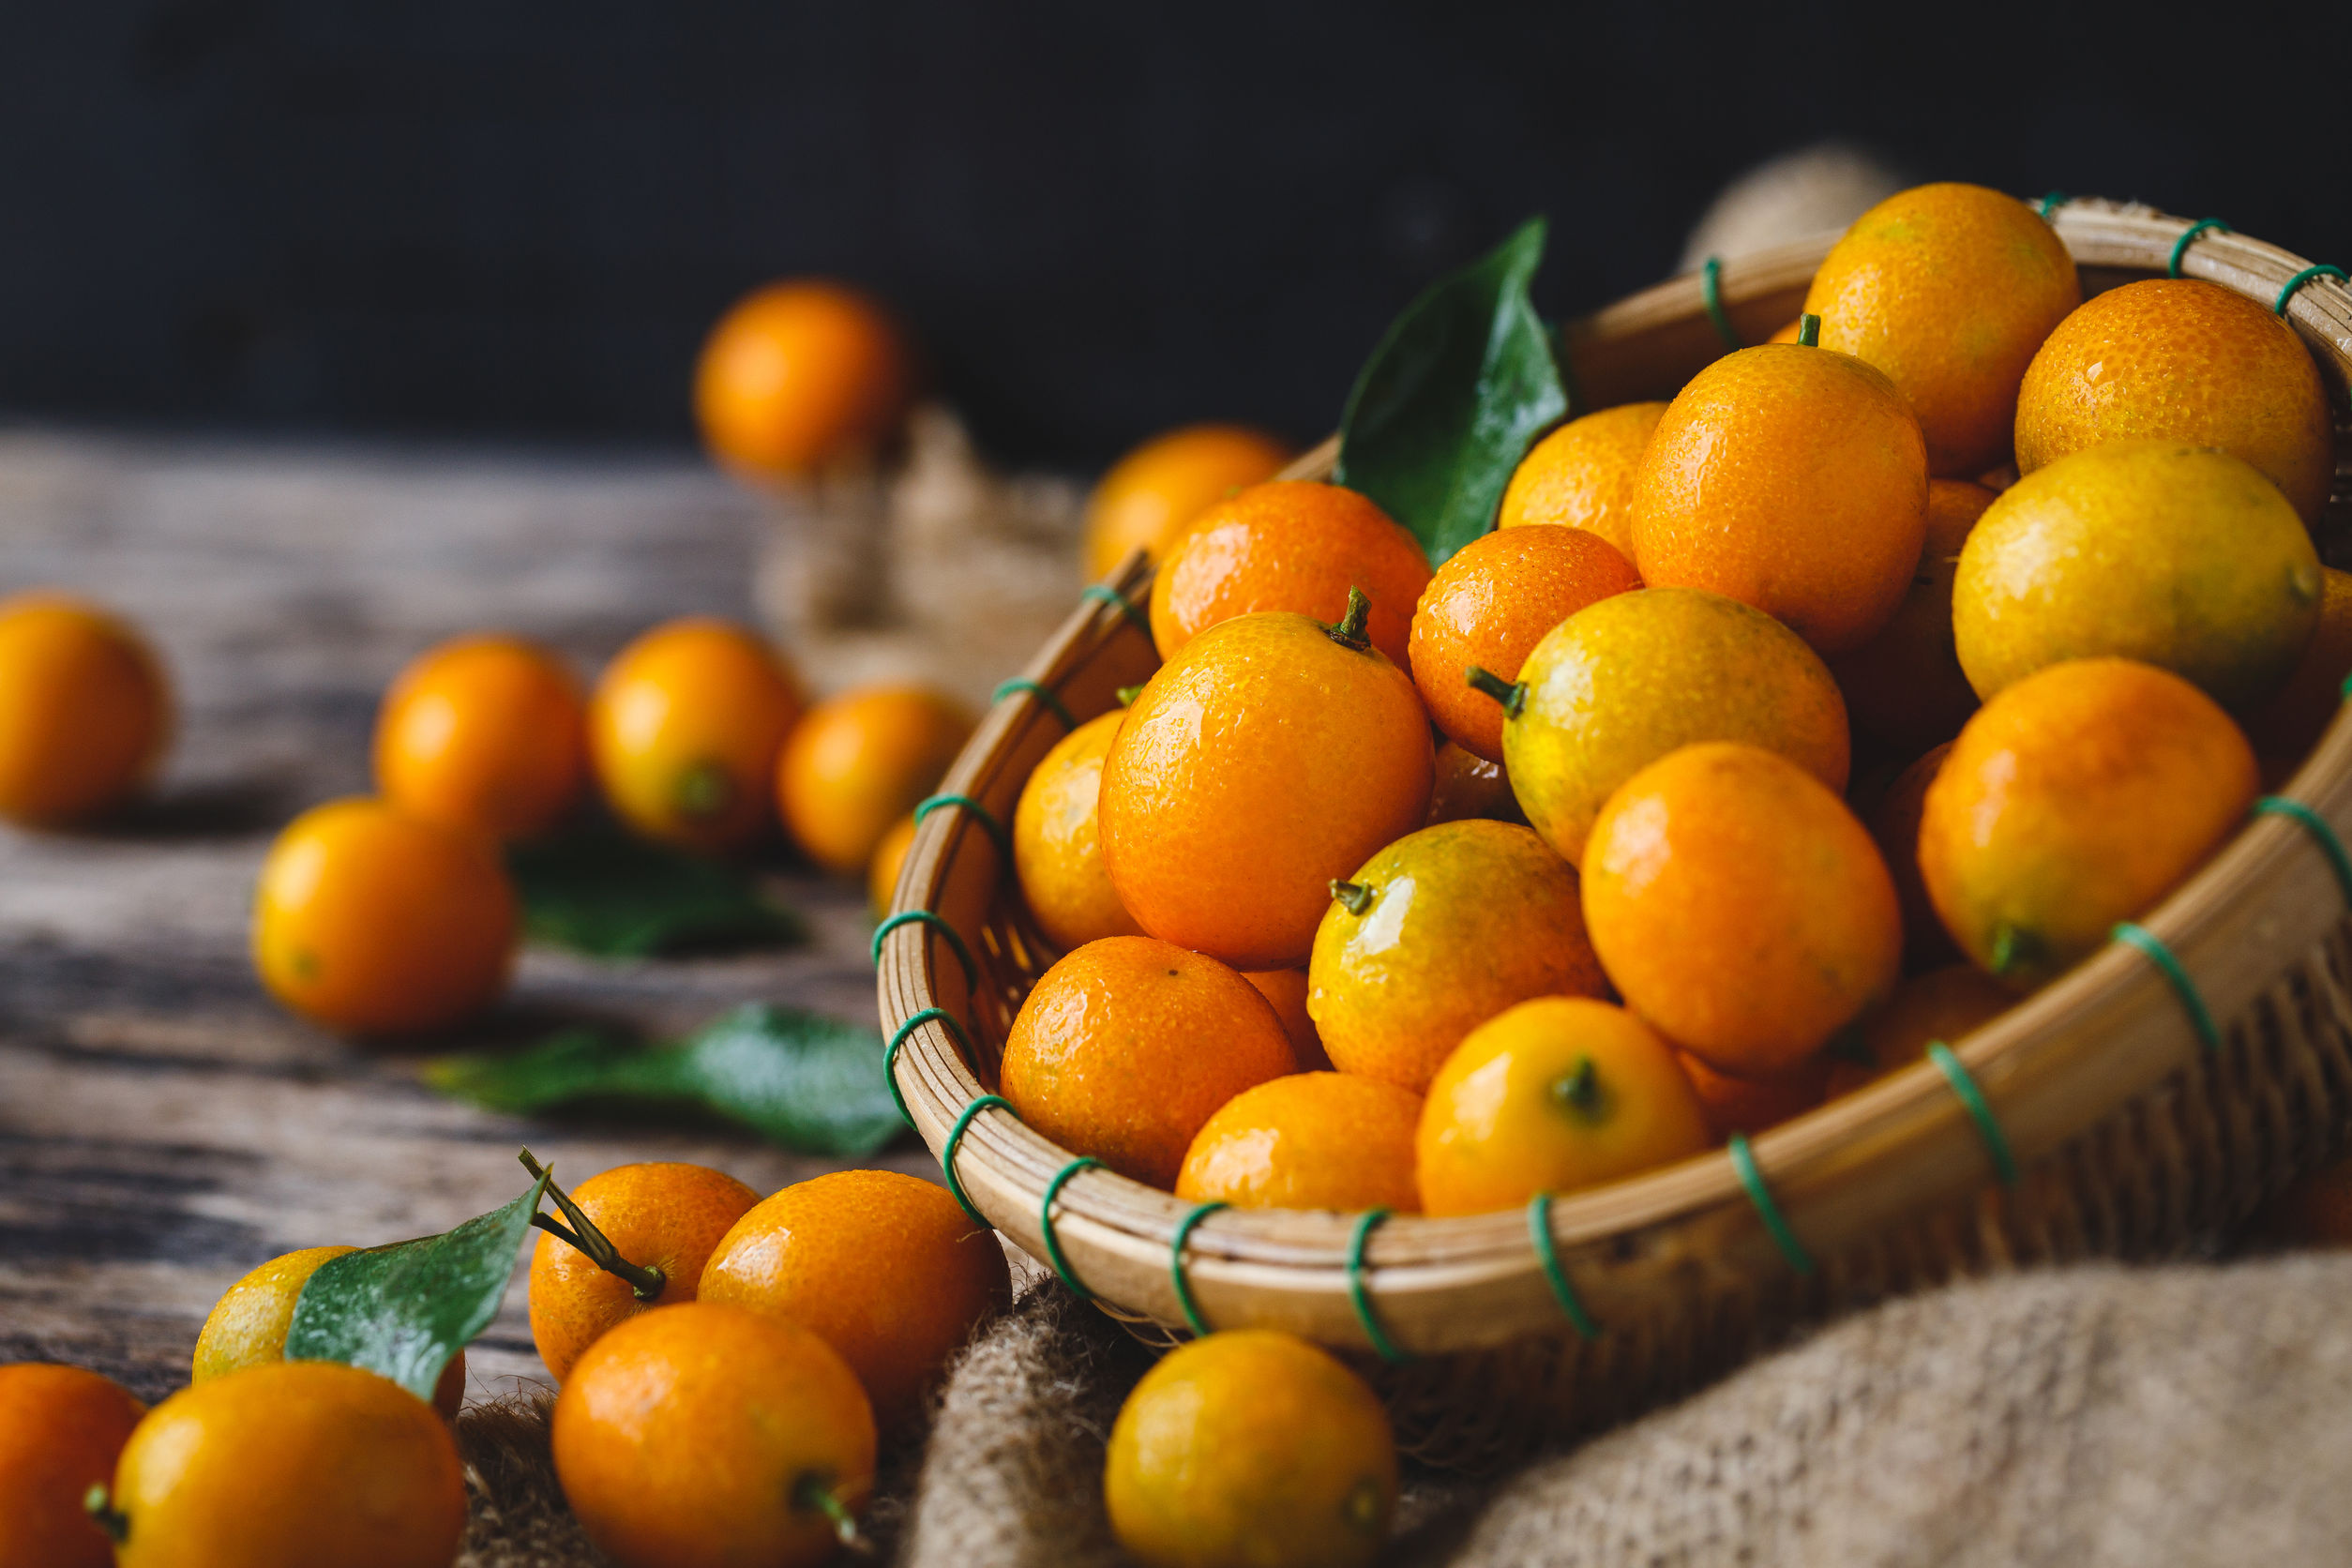 The Nagami variety of kumquats grown in Dade city feature a thin, sweet skin and a slightly tart center.  They are about the size of a cherry tomato and should be eaten fresh like a grape, peel and al